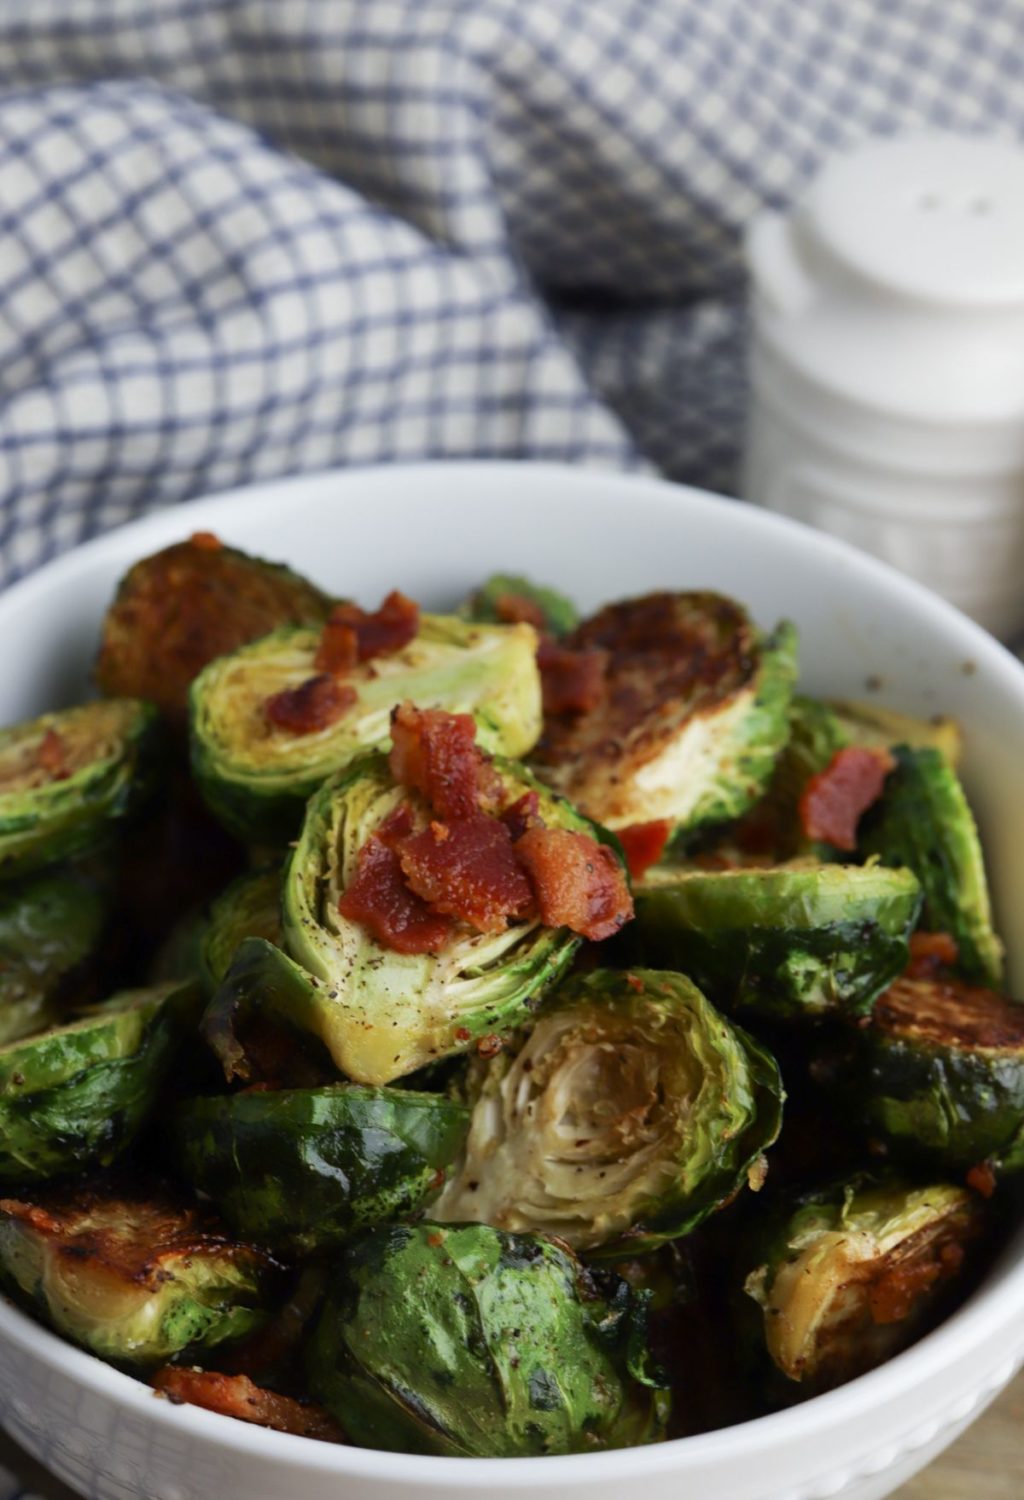 Roasted brussels sprouts with bacon in a bowl.